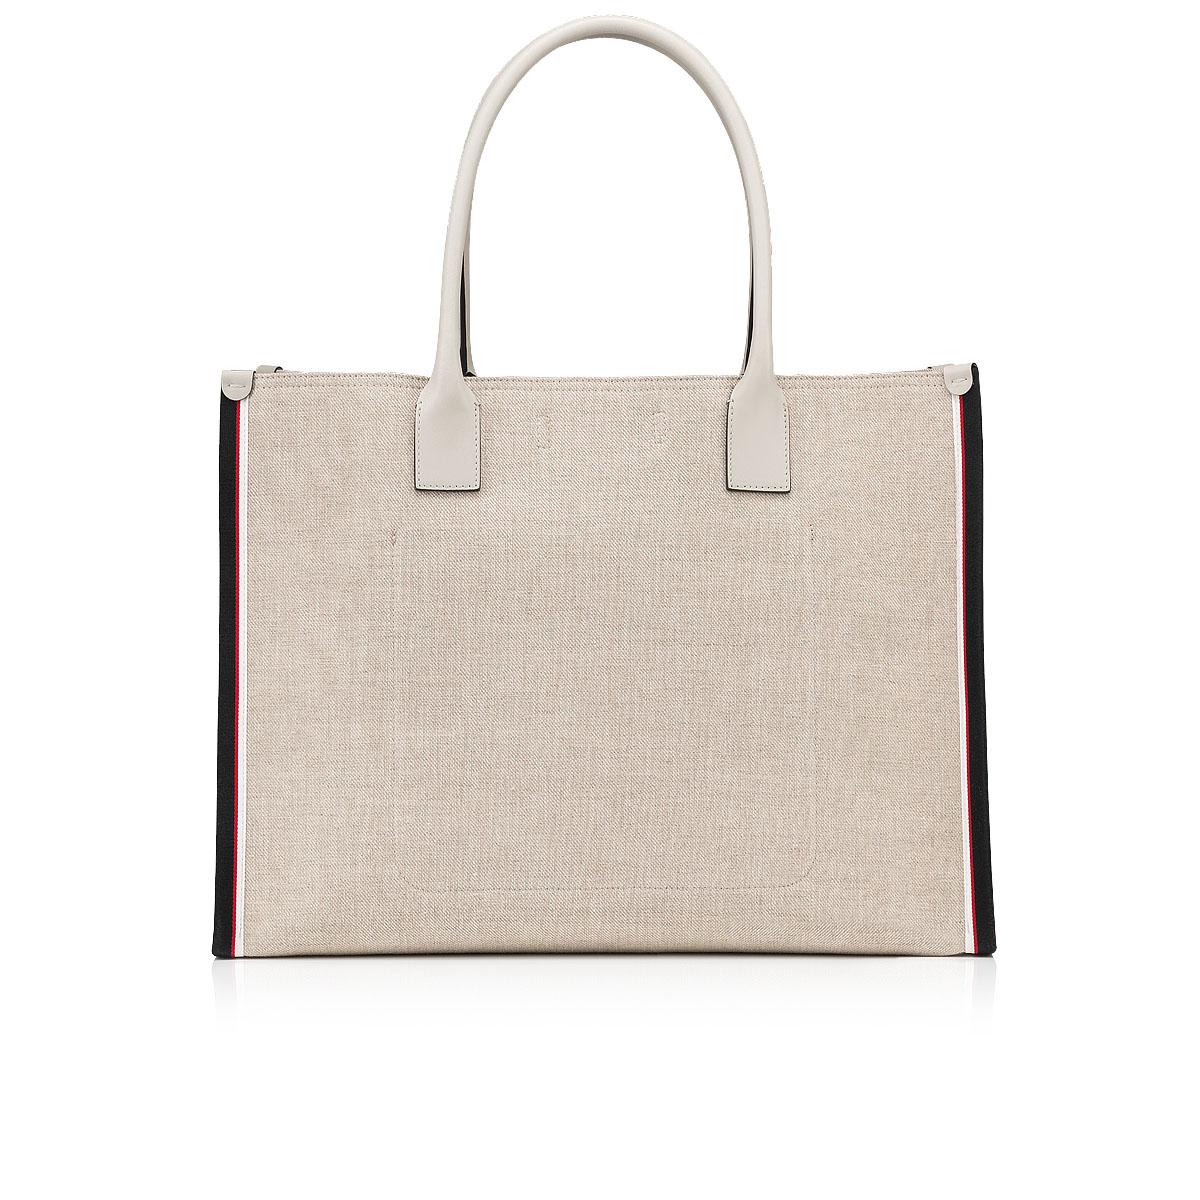 Nastroloubi F.A.V. XL - Tote bag - Linen Country and calf leather